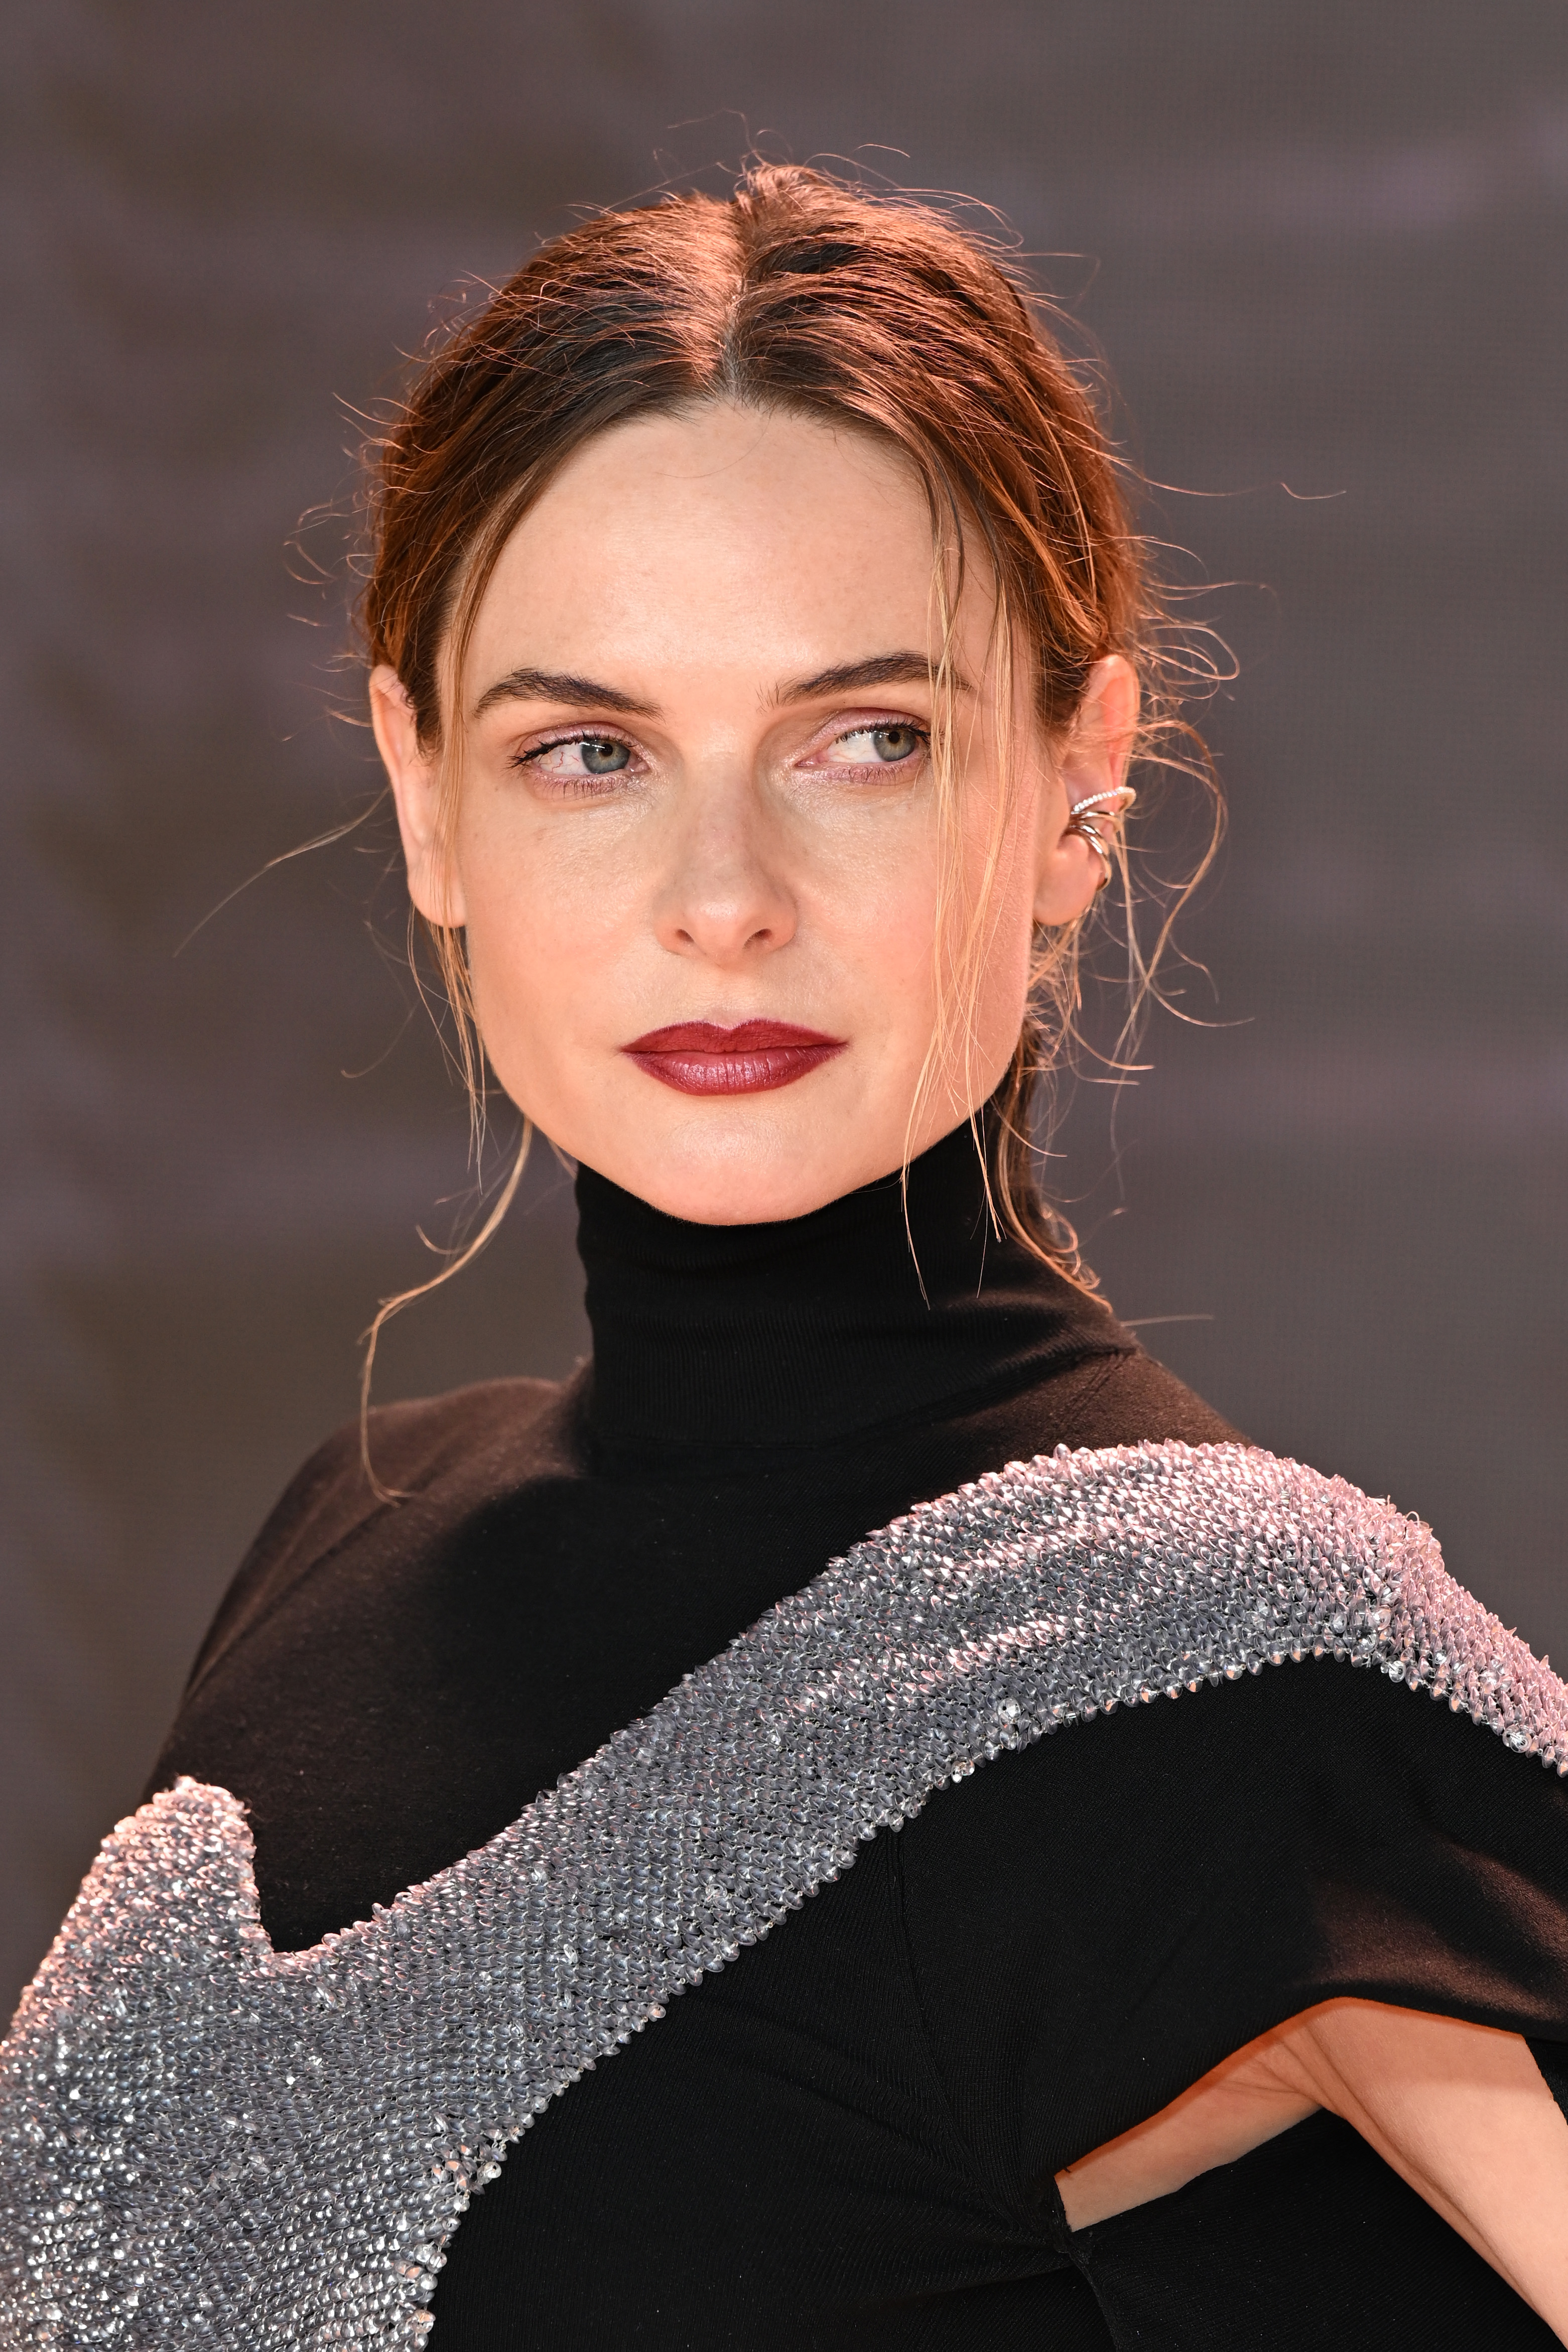 Rebecca in an outfit with a sparkling silver accent, looking to the side